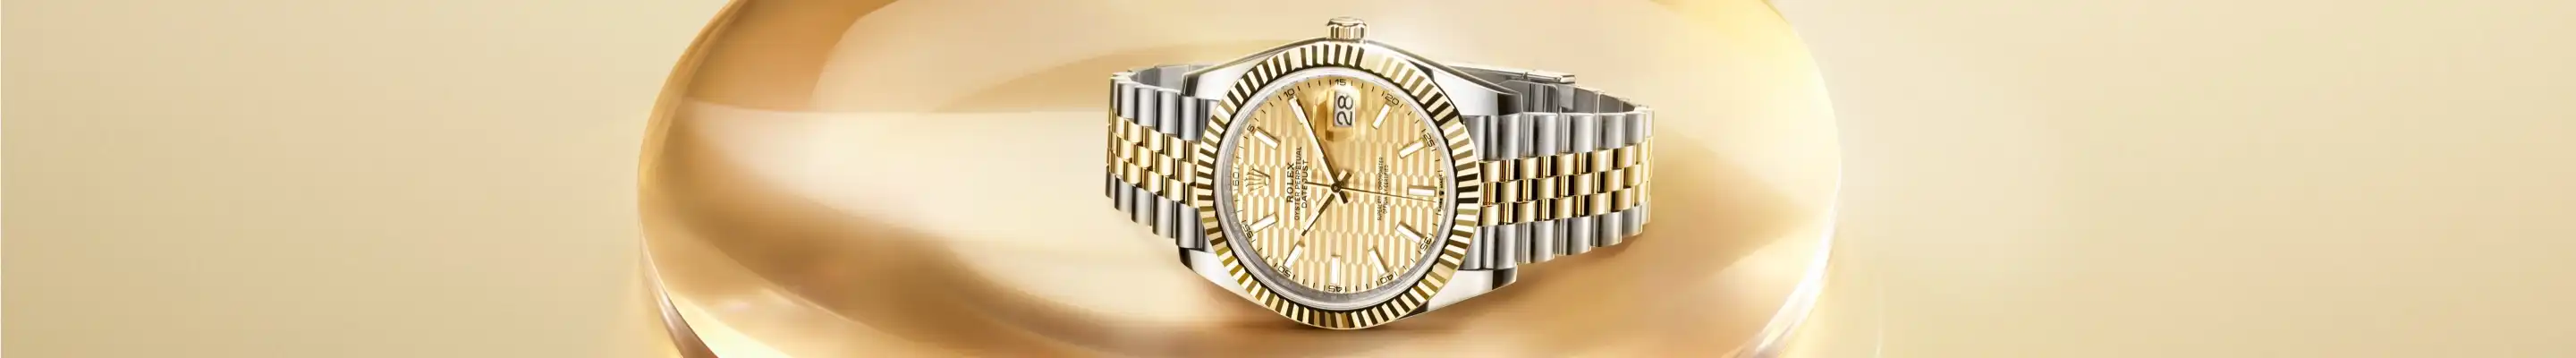 Make a Date of a Day I Rolex Datejust at Swiss Time Square